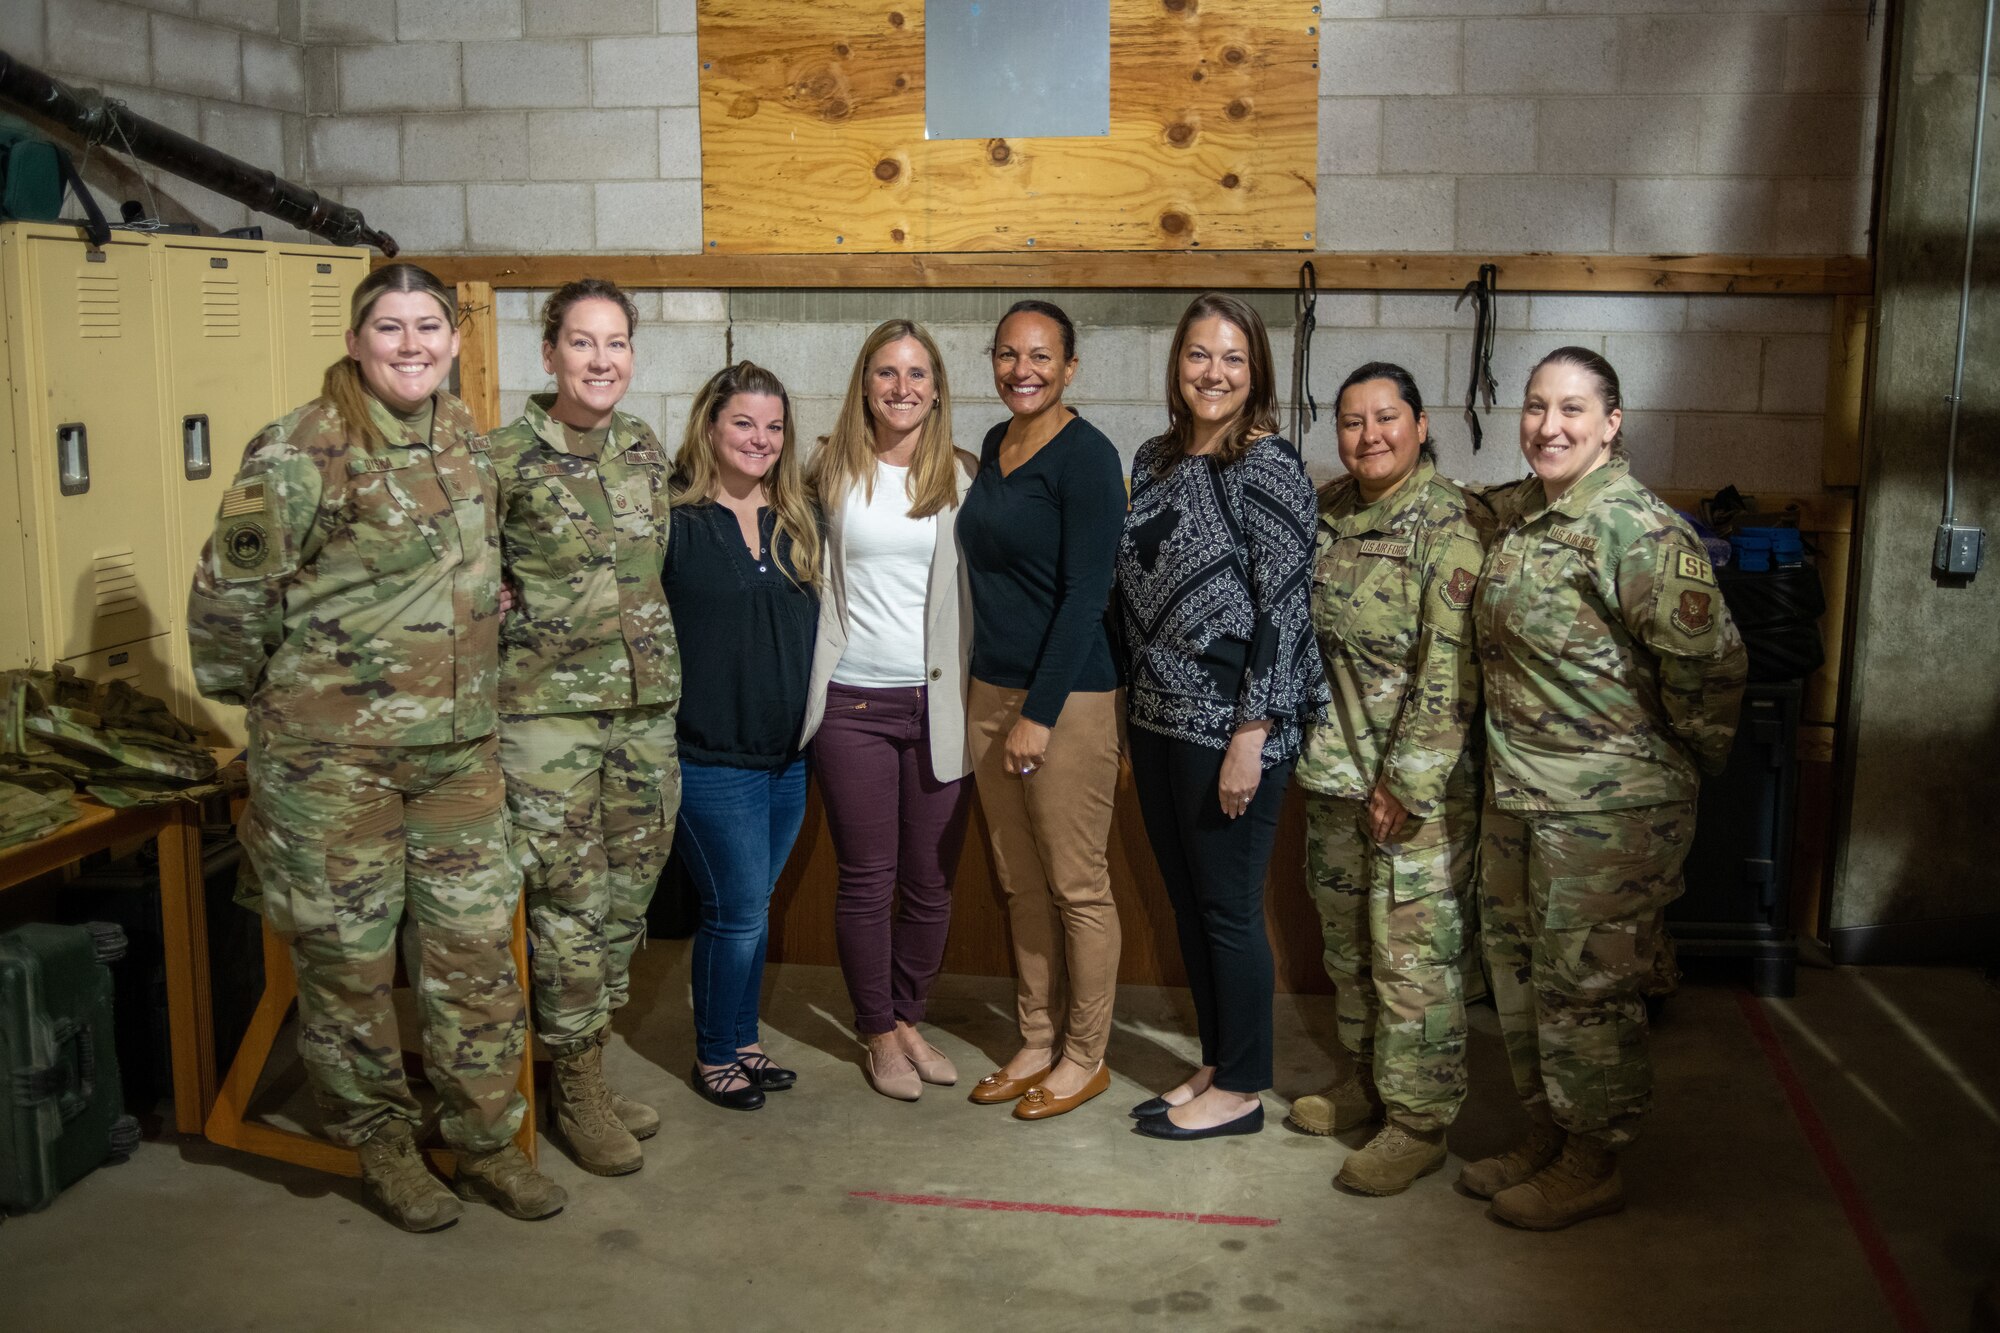 Marsha Cotton, spouse of Gen. Anthony Cotton, Air Force Global Strike Command commander, stands with Sarah Sheffield, spouse of Col. Sheffield, the 28th Bomb Wing commander, and the women of the 28th Security Forces Squadron at Ellsworth Air Force Base, S.D., May 25, 2022.